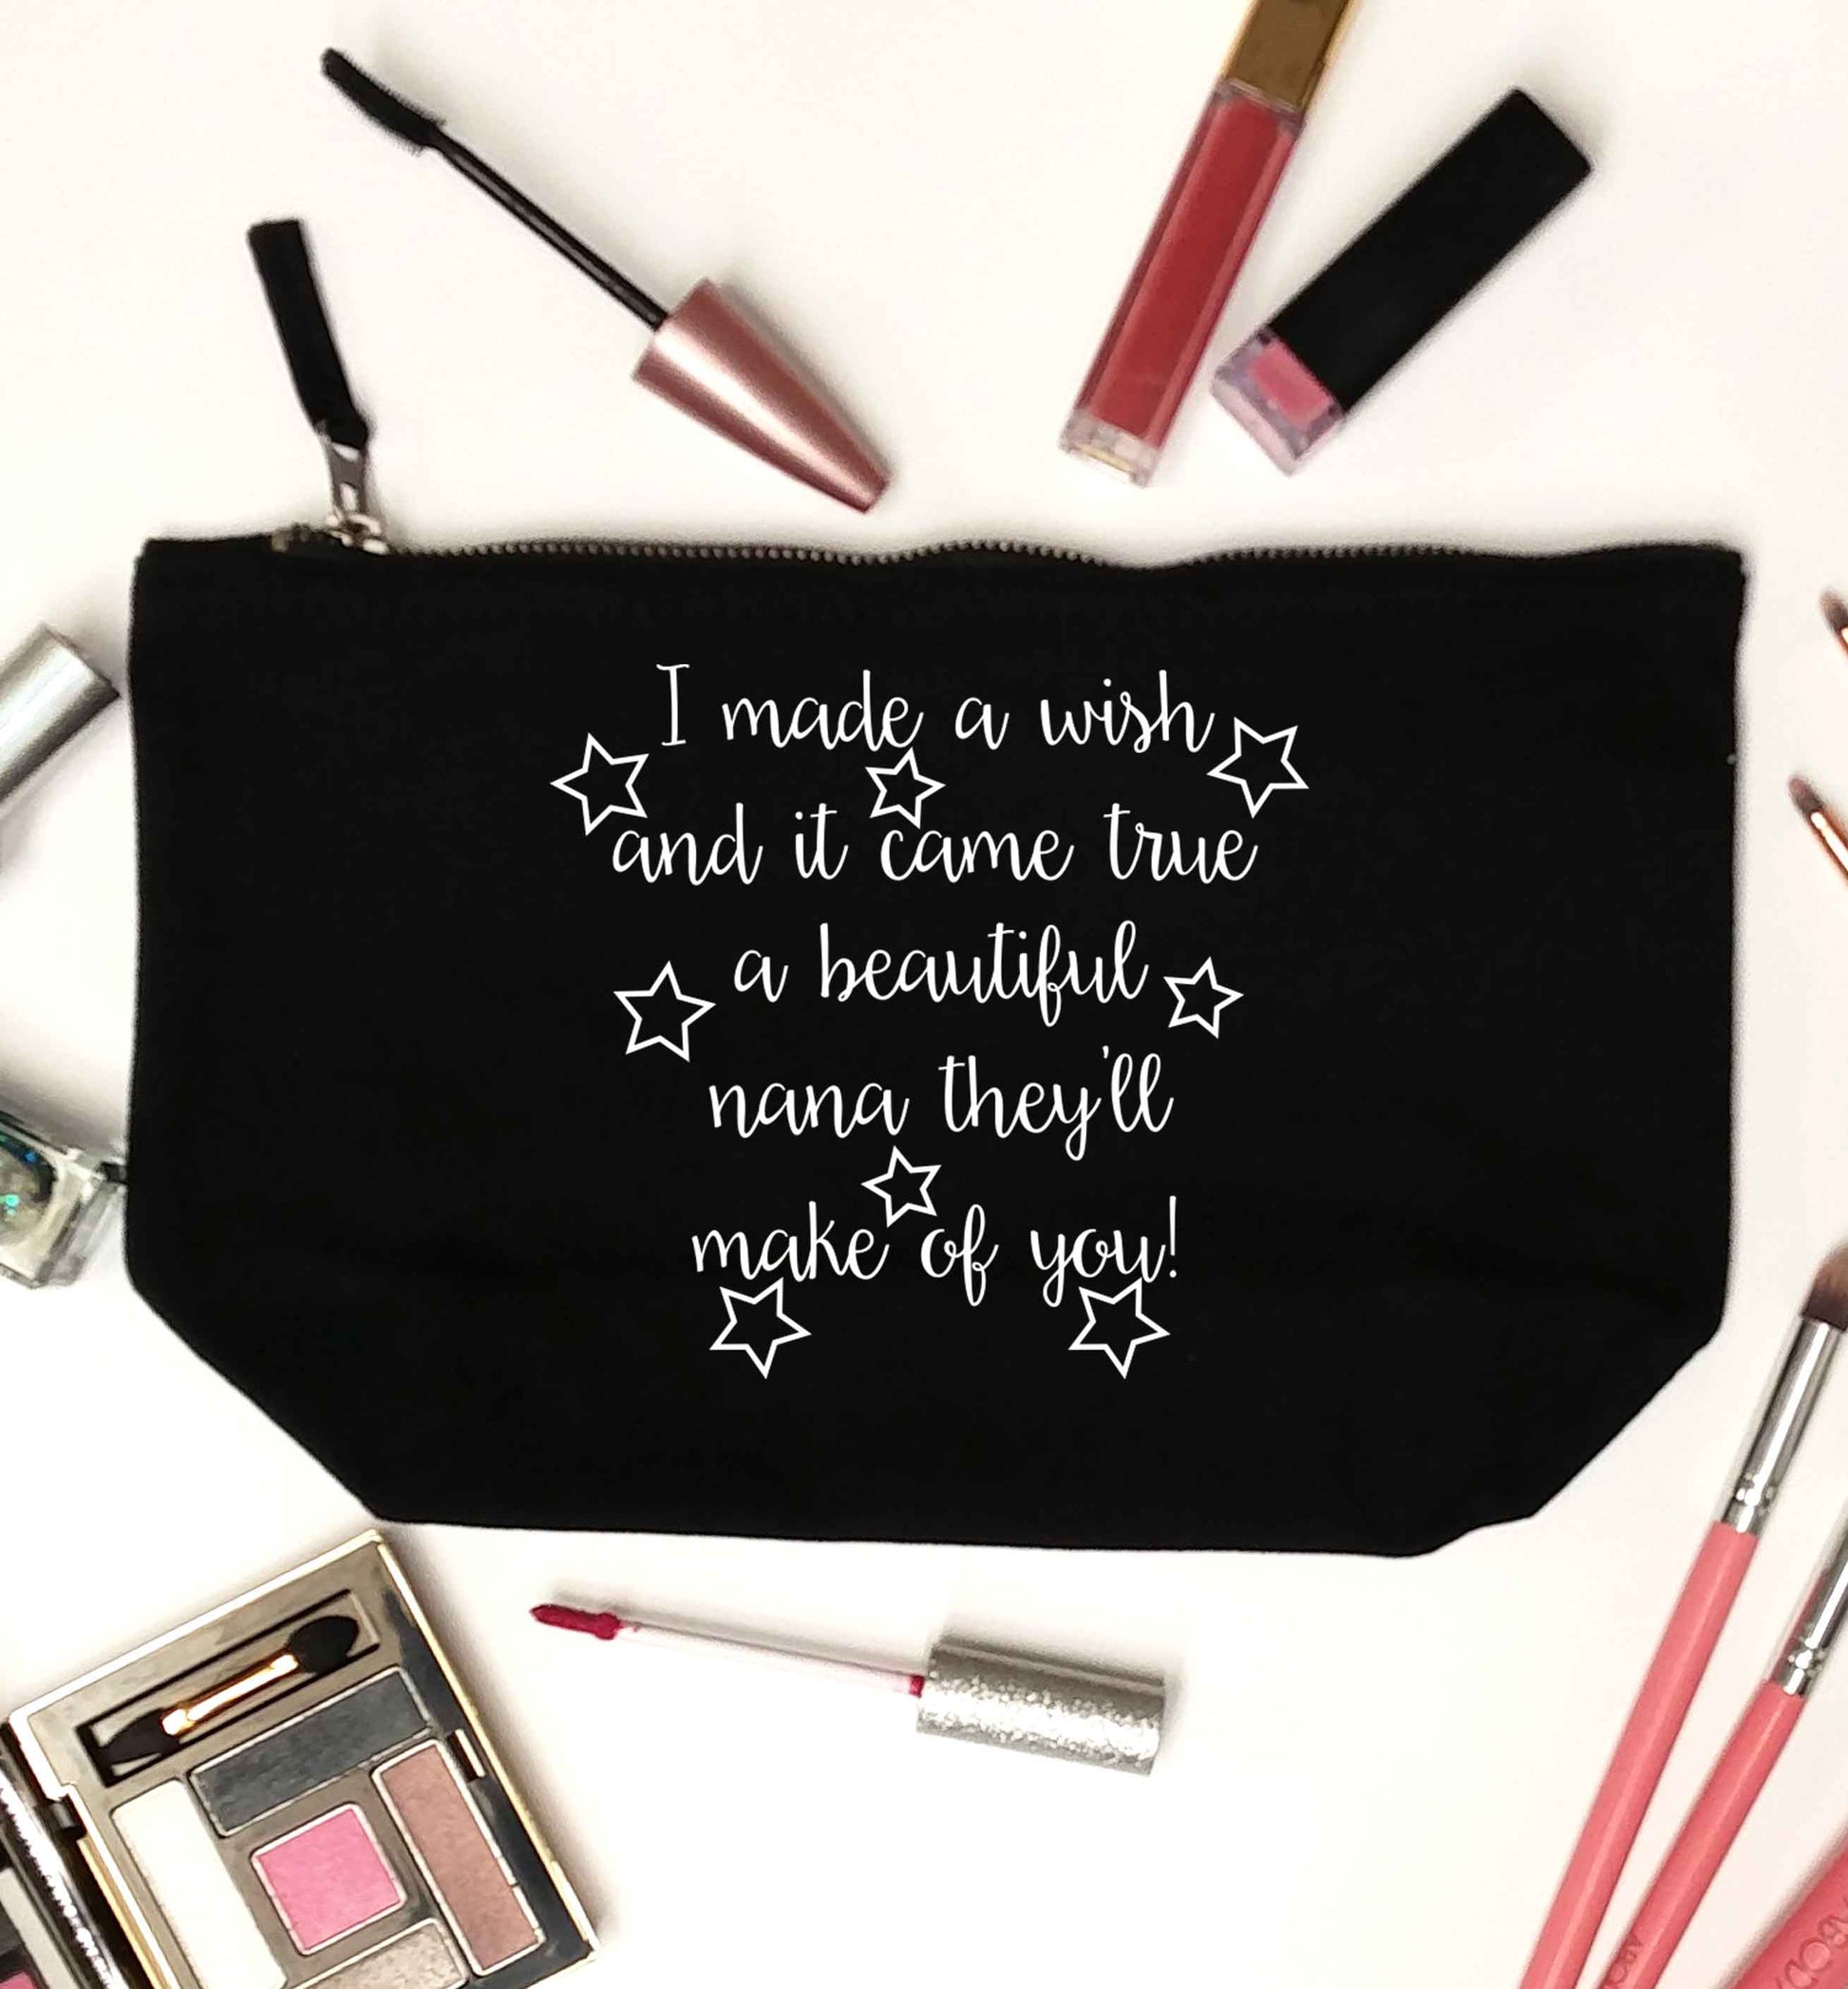 I made a wish and it came true a beautiful nana they'll make of you! black makeup bag